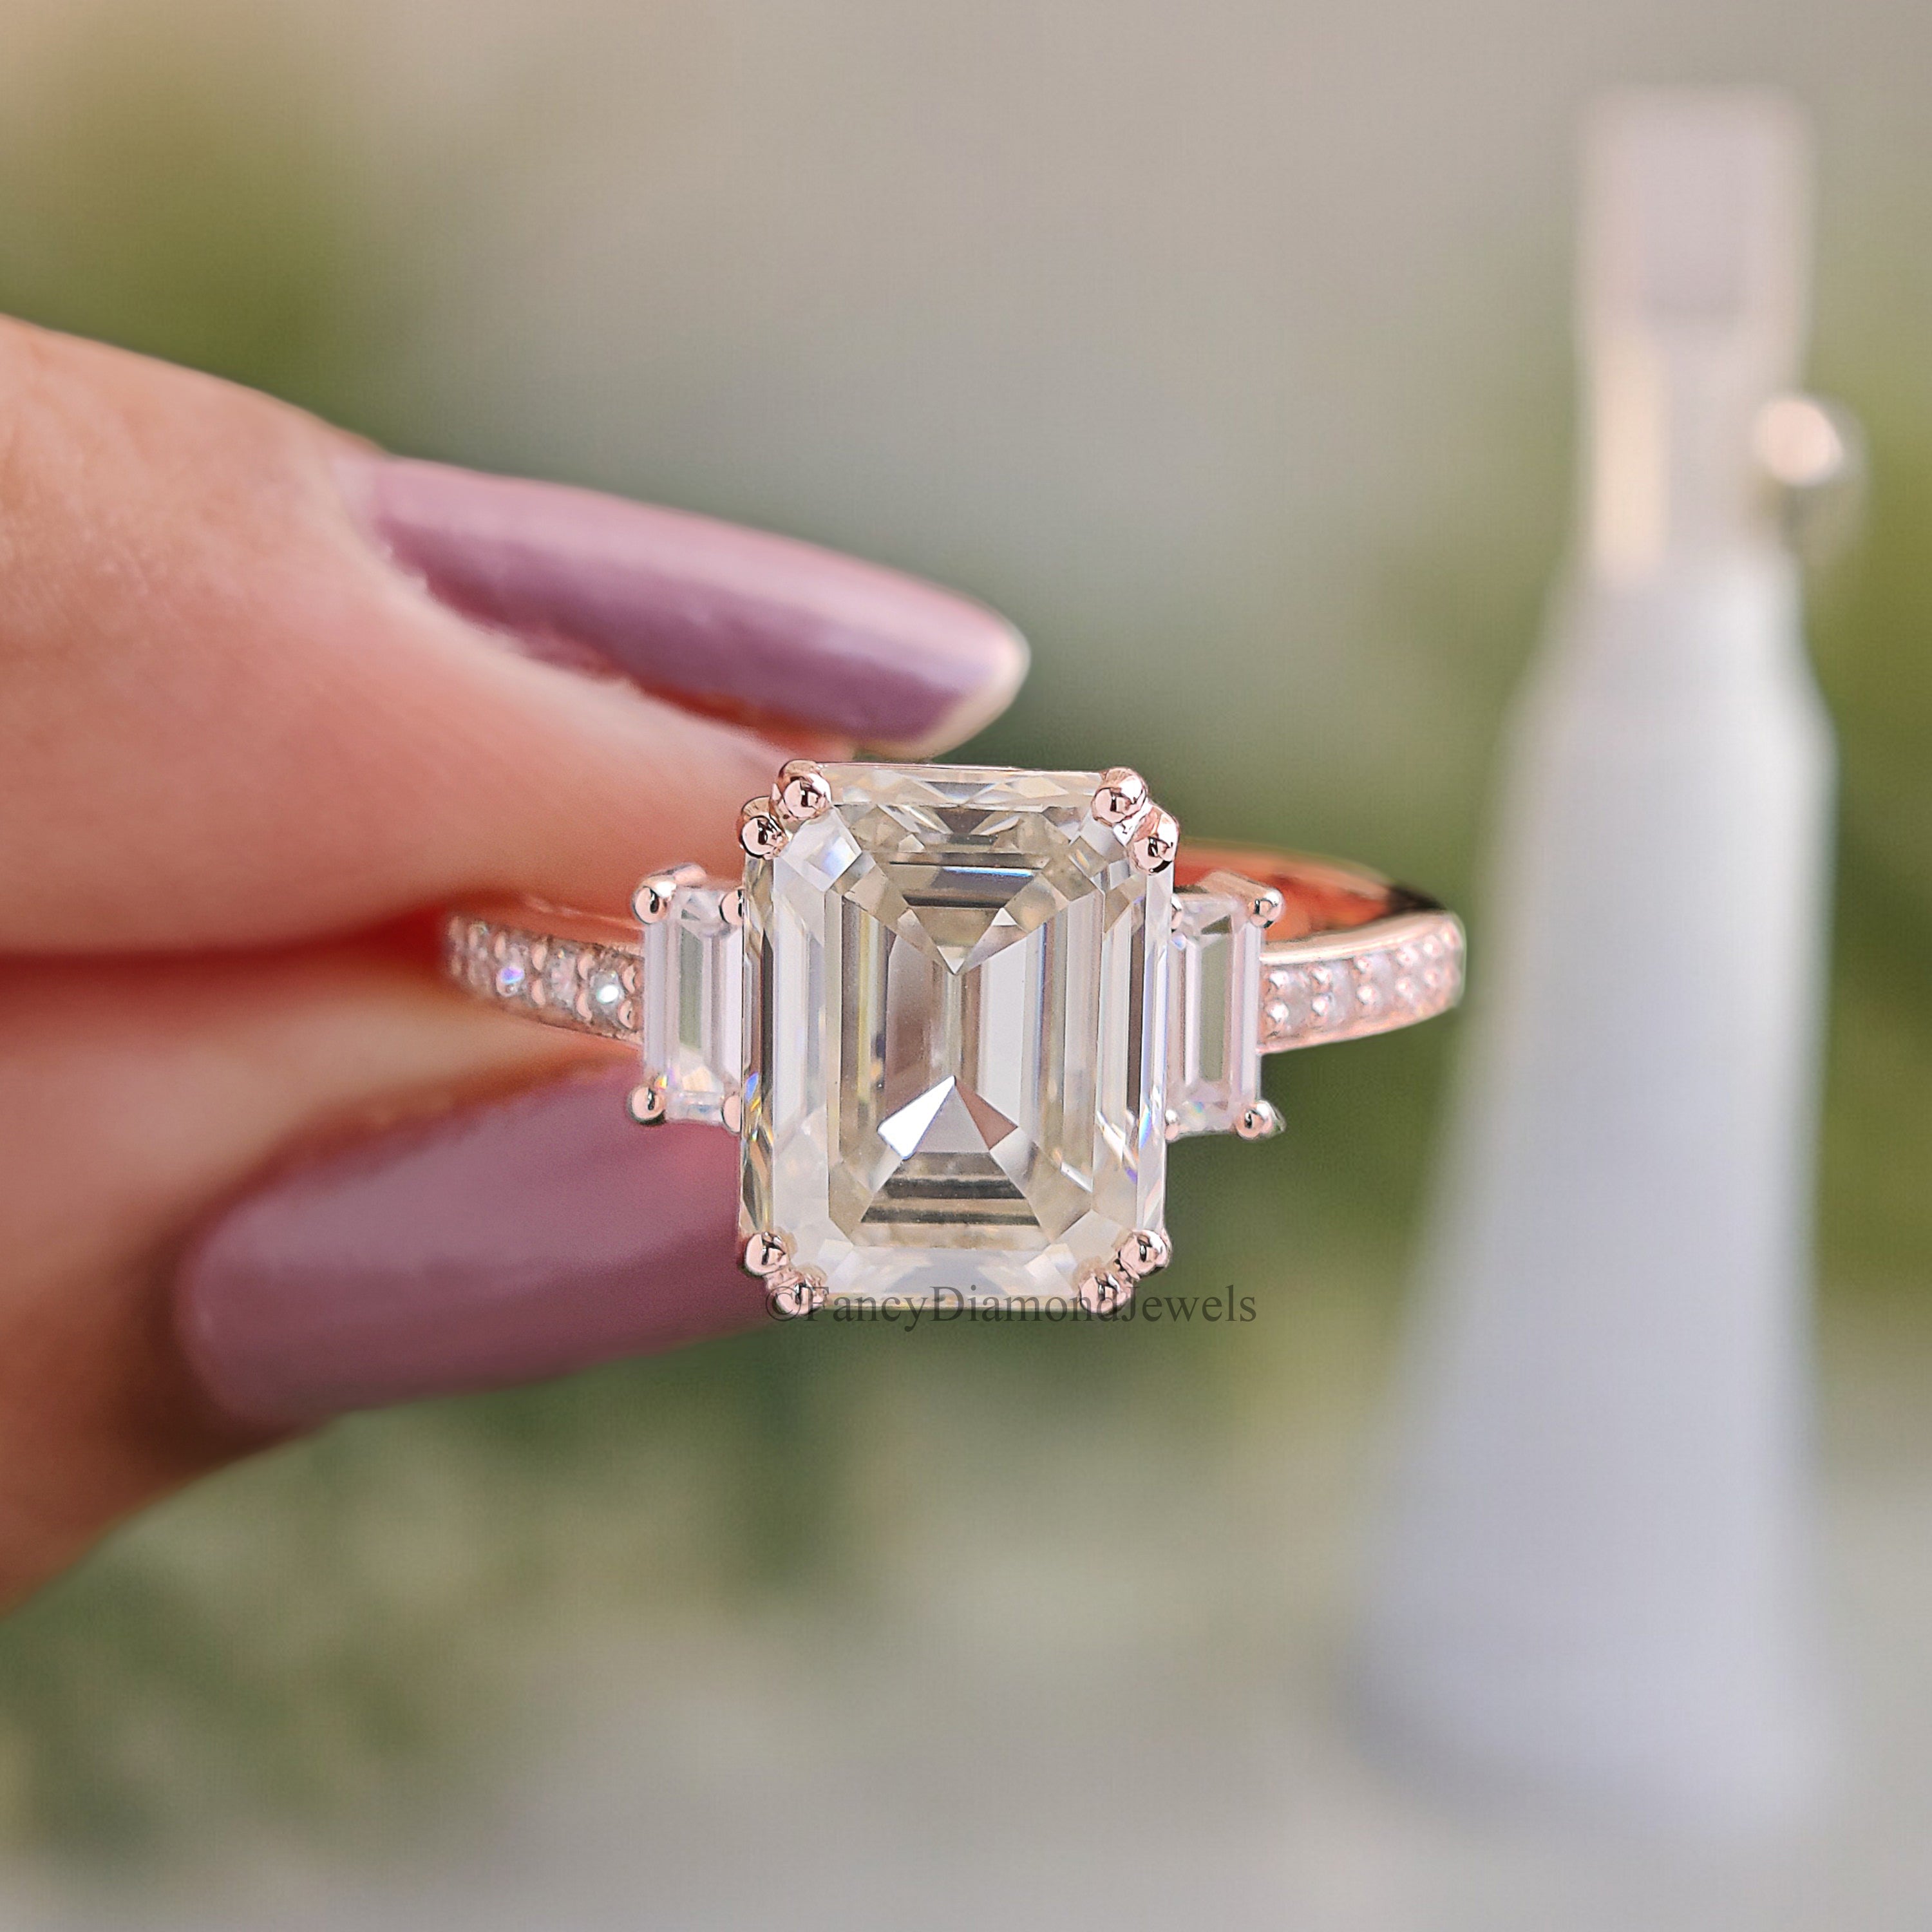 Vintage Emerald Cut Moissanite Ring Three Stone Engagement Ring Bridal Wedding Ring Anniversary Gift Ring Valentine's Gift For Women FD191